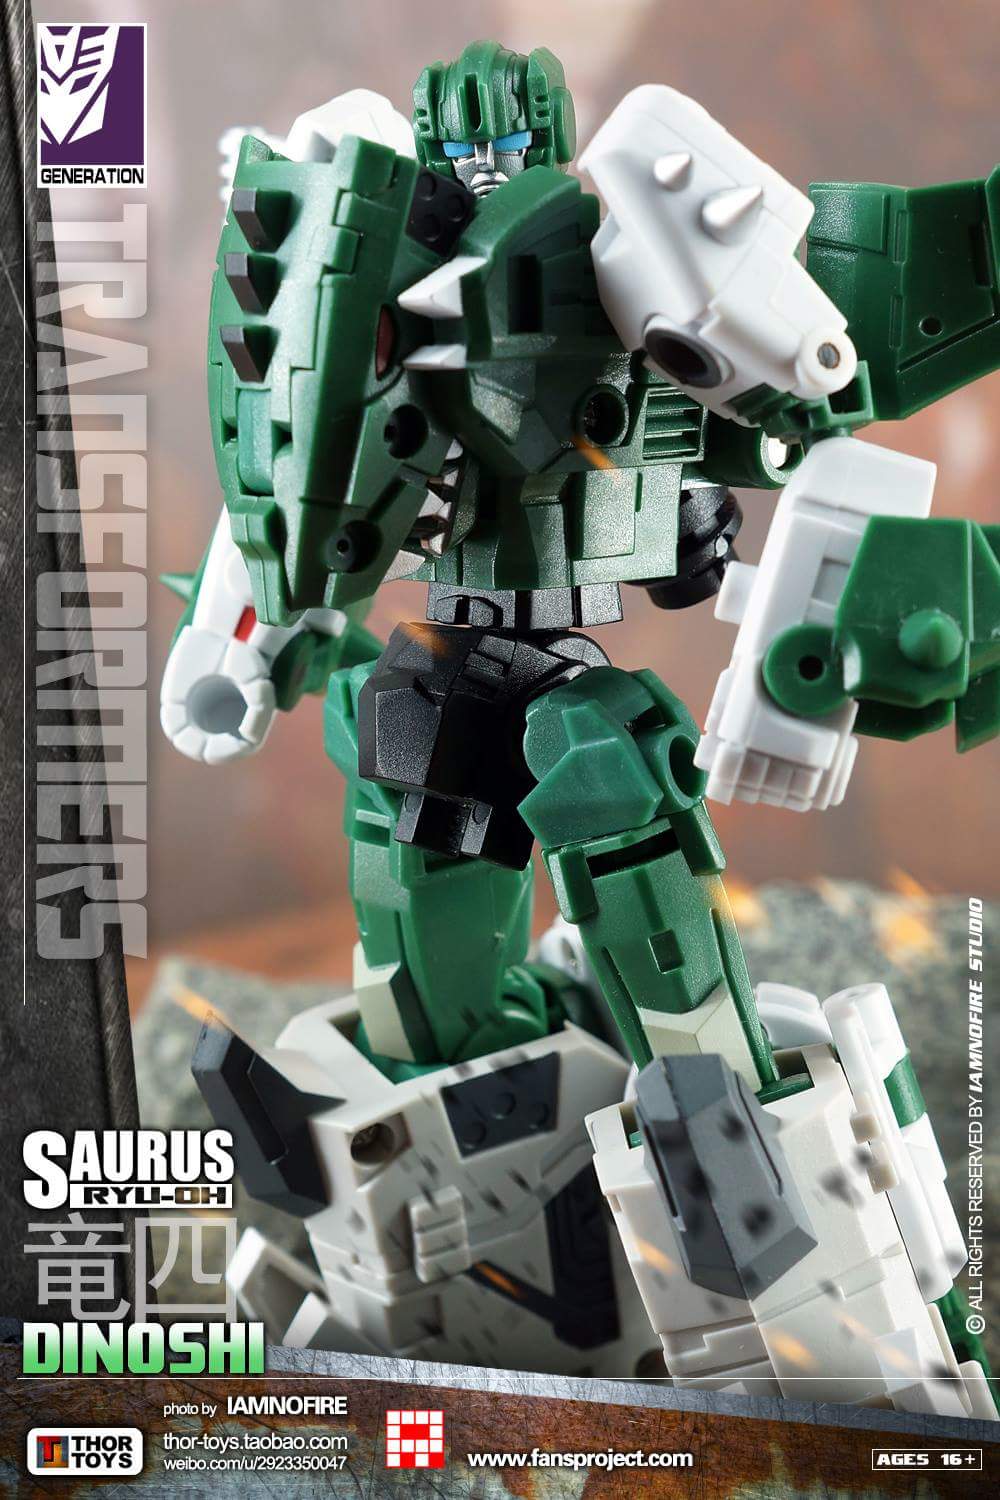 [FansProject] Produit Tiers - Ryu-Oh aka Dinoking (Victory) | Beastructor aka Monstructor (USA) - Page 2 TYlcMuUq